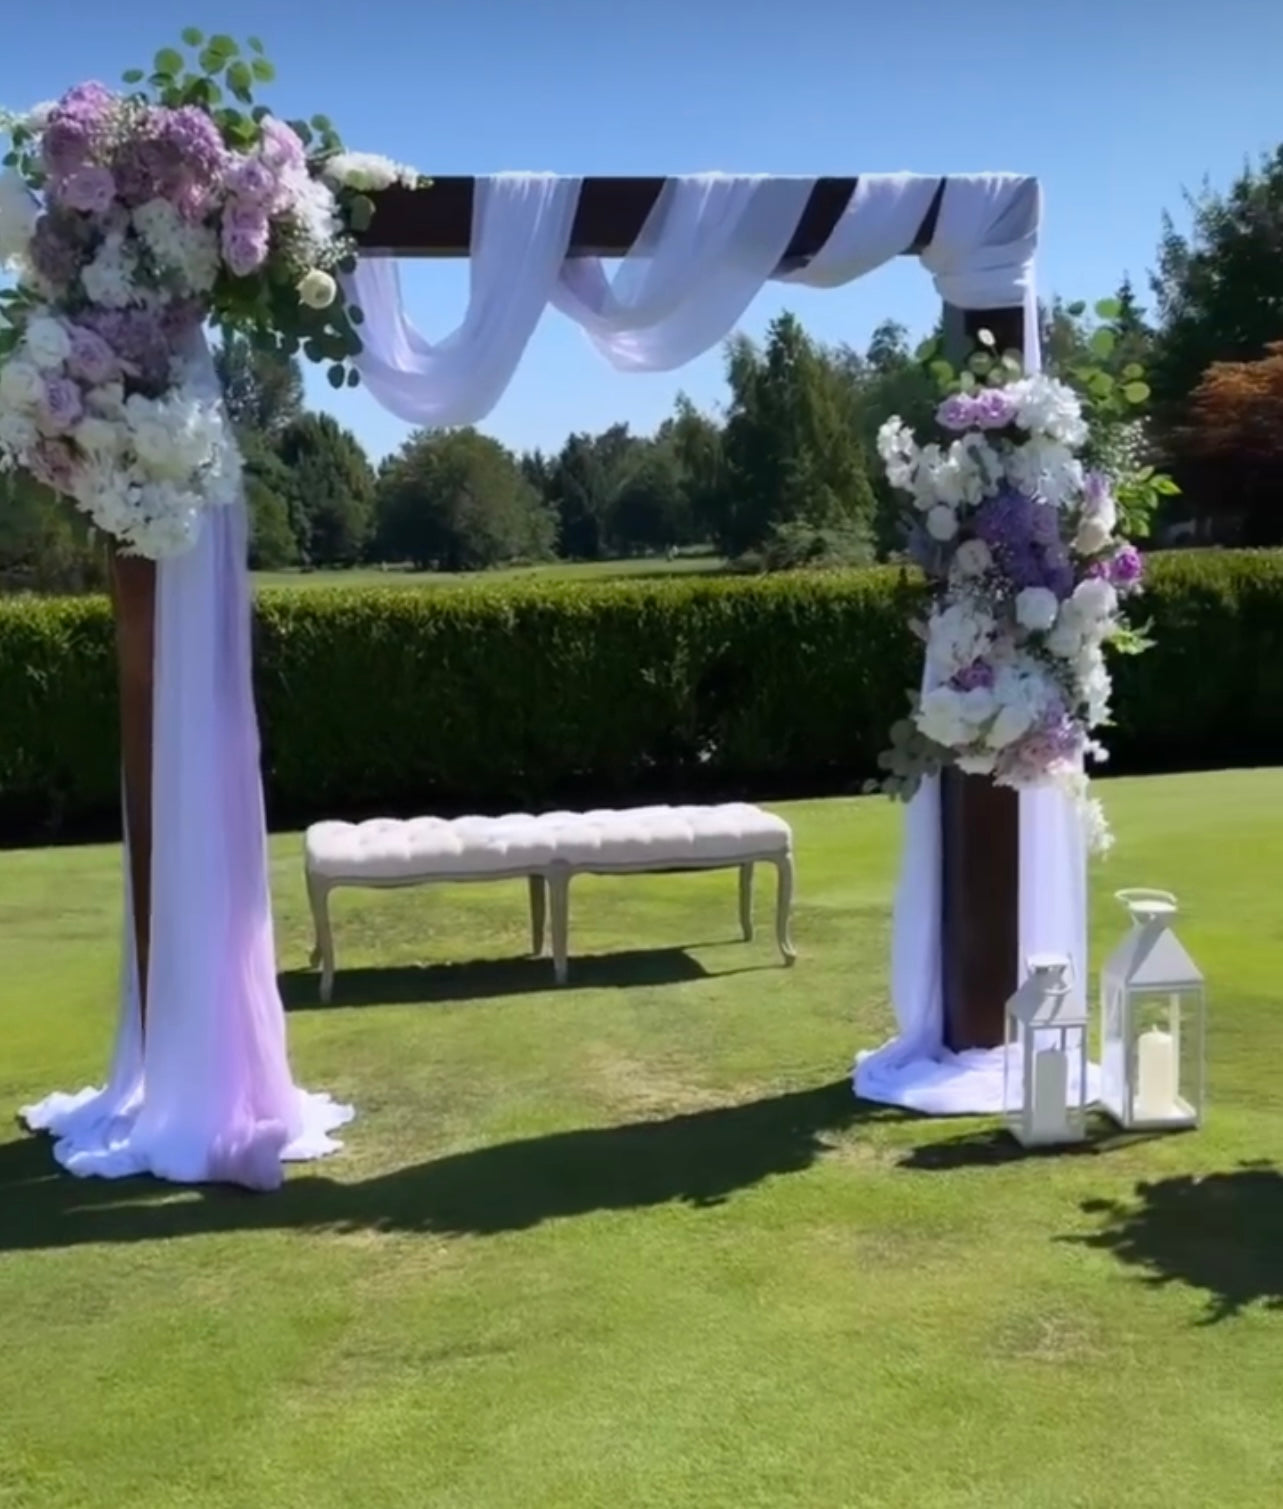 Elegant wooden arch setup as a backdrop for an outdoor wedding event.